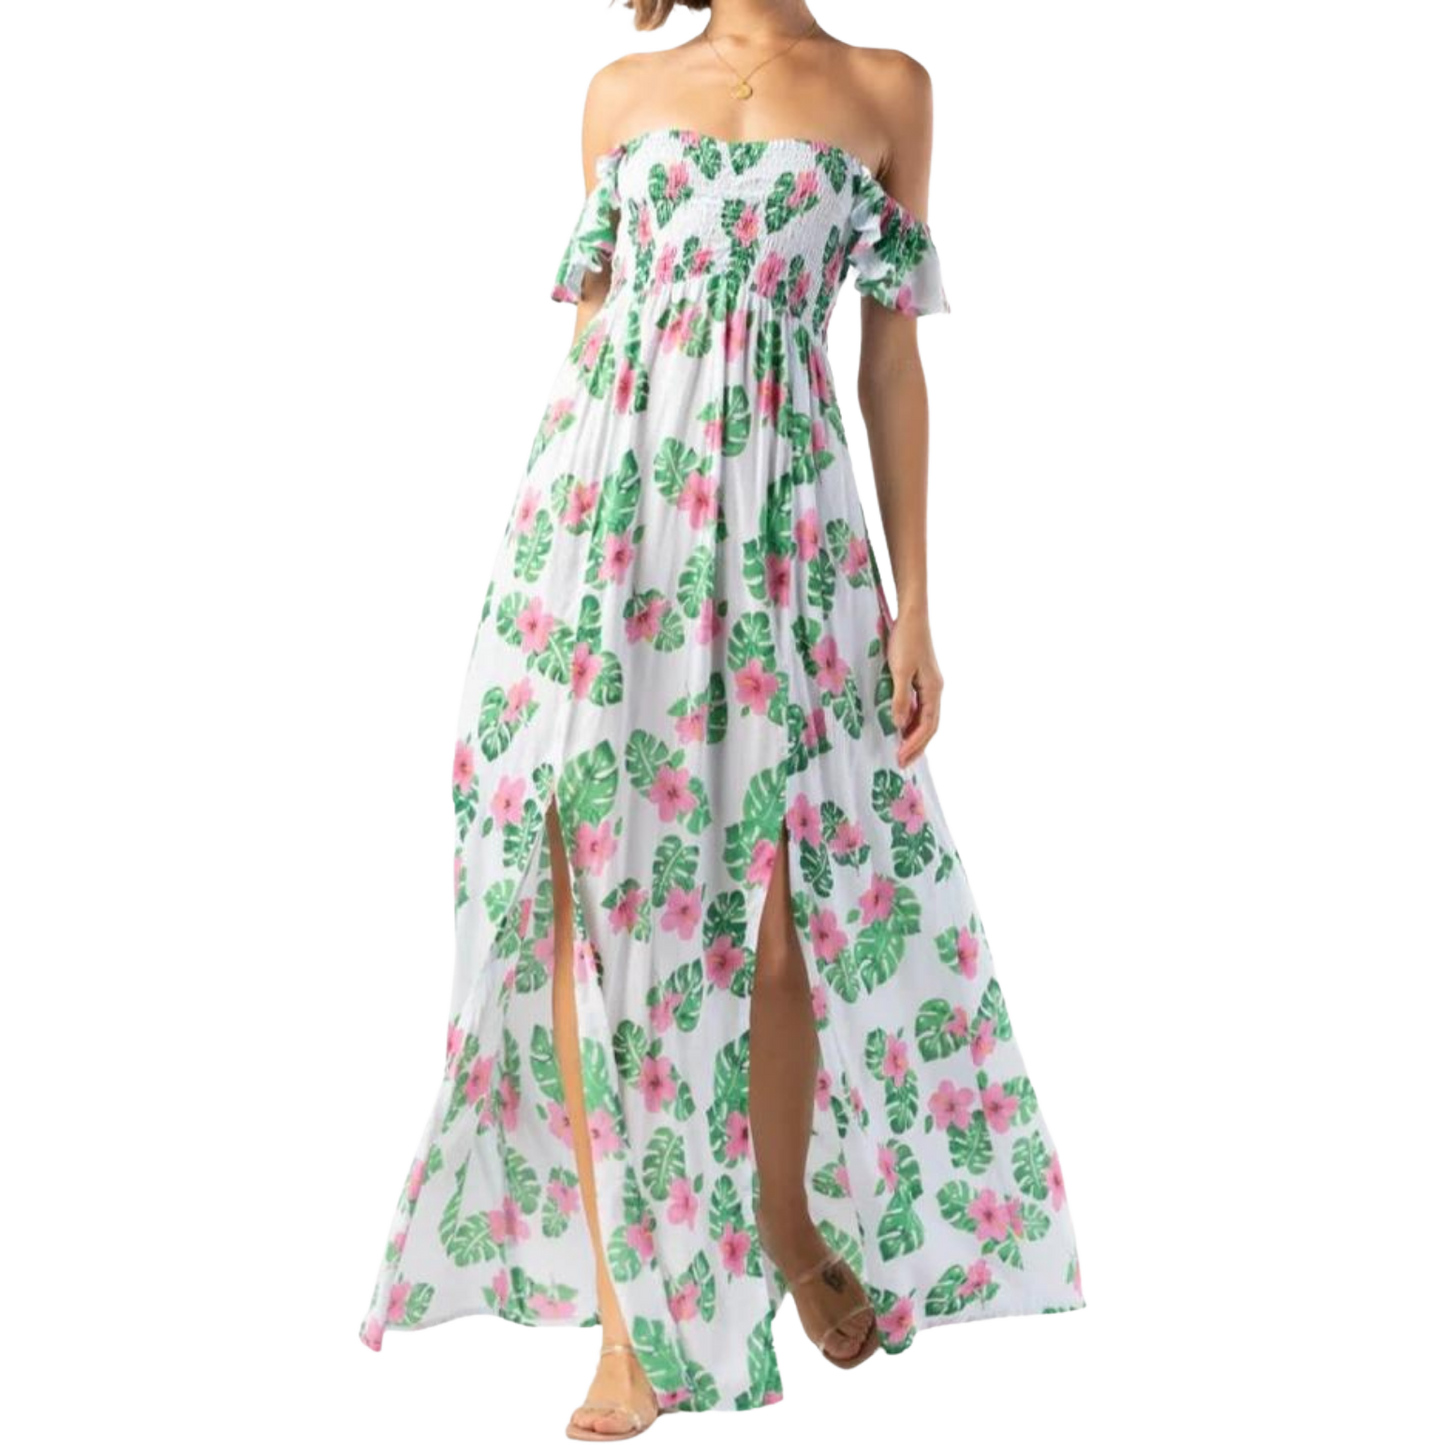 Load image into Gallery viewer, Tiare Hawaii Hollie Tahitian Hibiscus Dress (1 Size)
